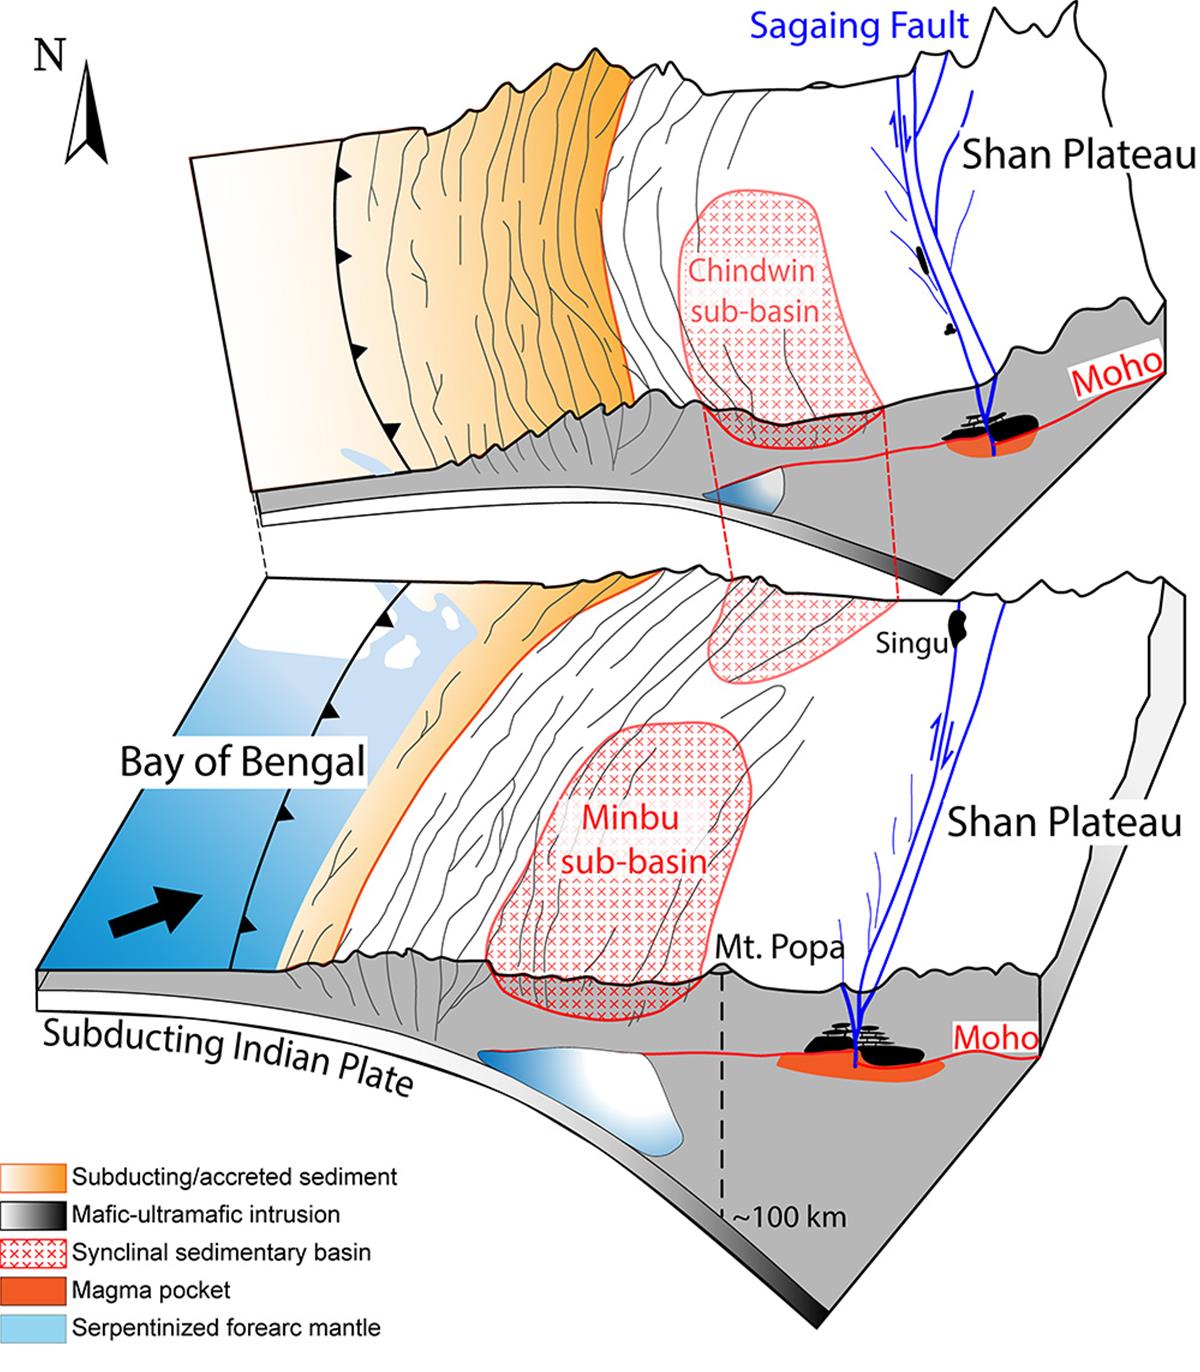 3D model of the subsurface structure under Myanmar highlighting the main findings of the study: two basins, serpentinised zone and basaltic magma under the Sagaing Fault (Source: Earth Observatory of Singapore)